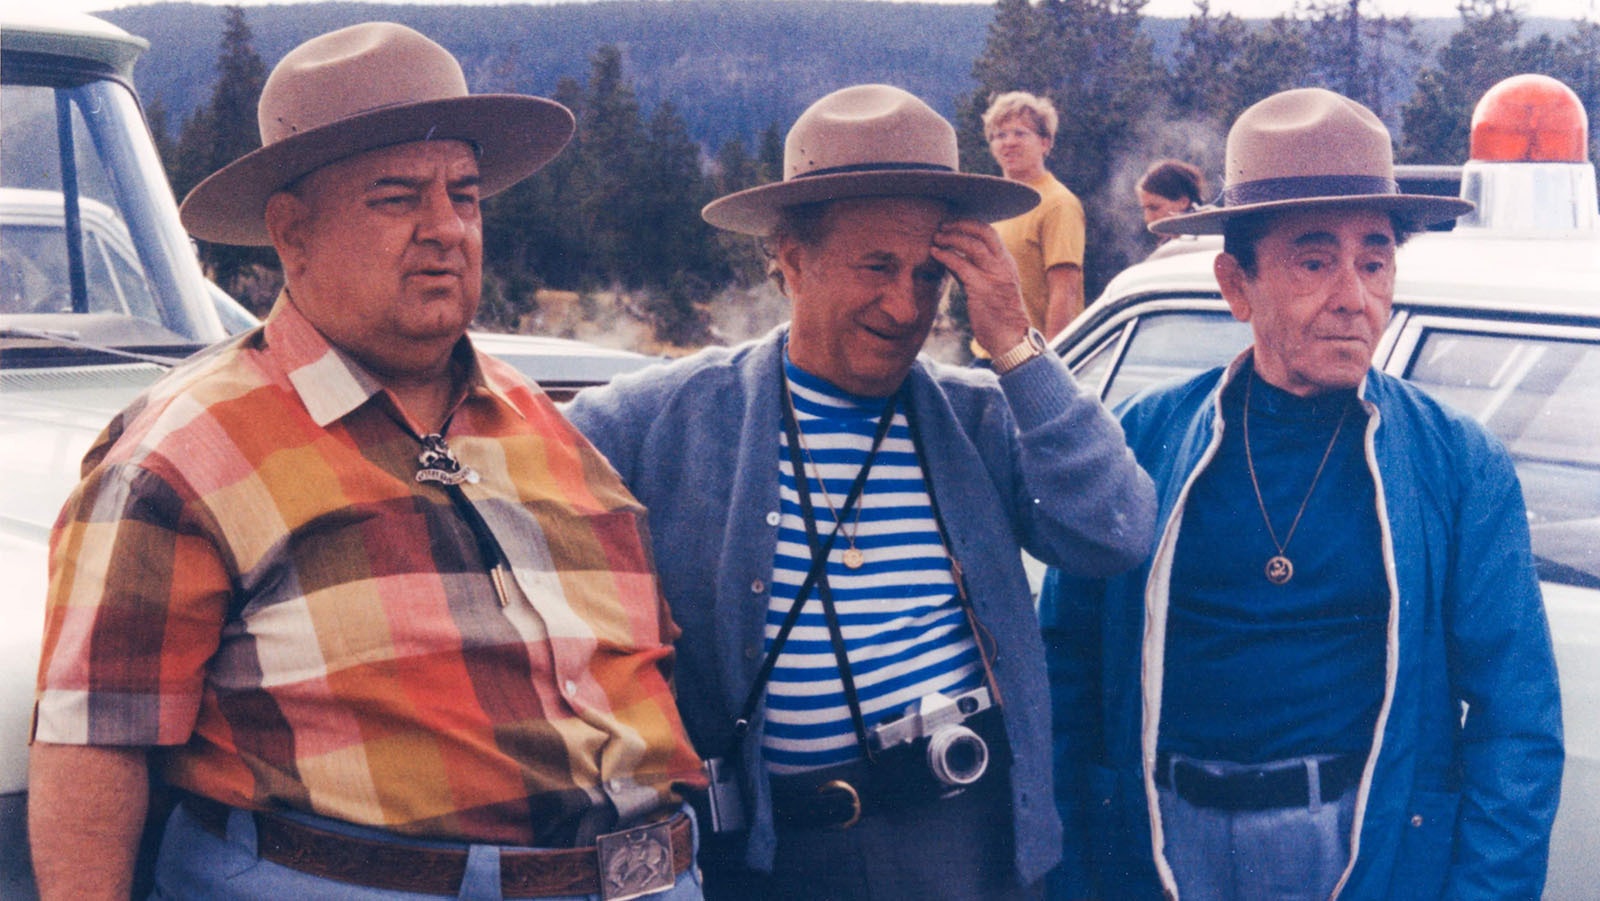 The Three Stooges at Yellowstone National Park in 1969.